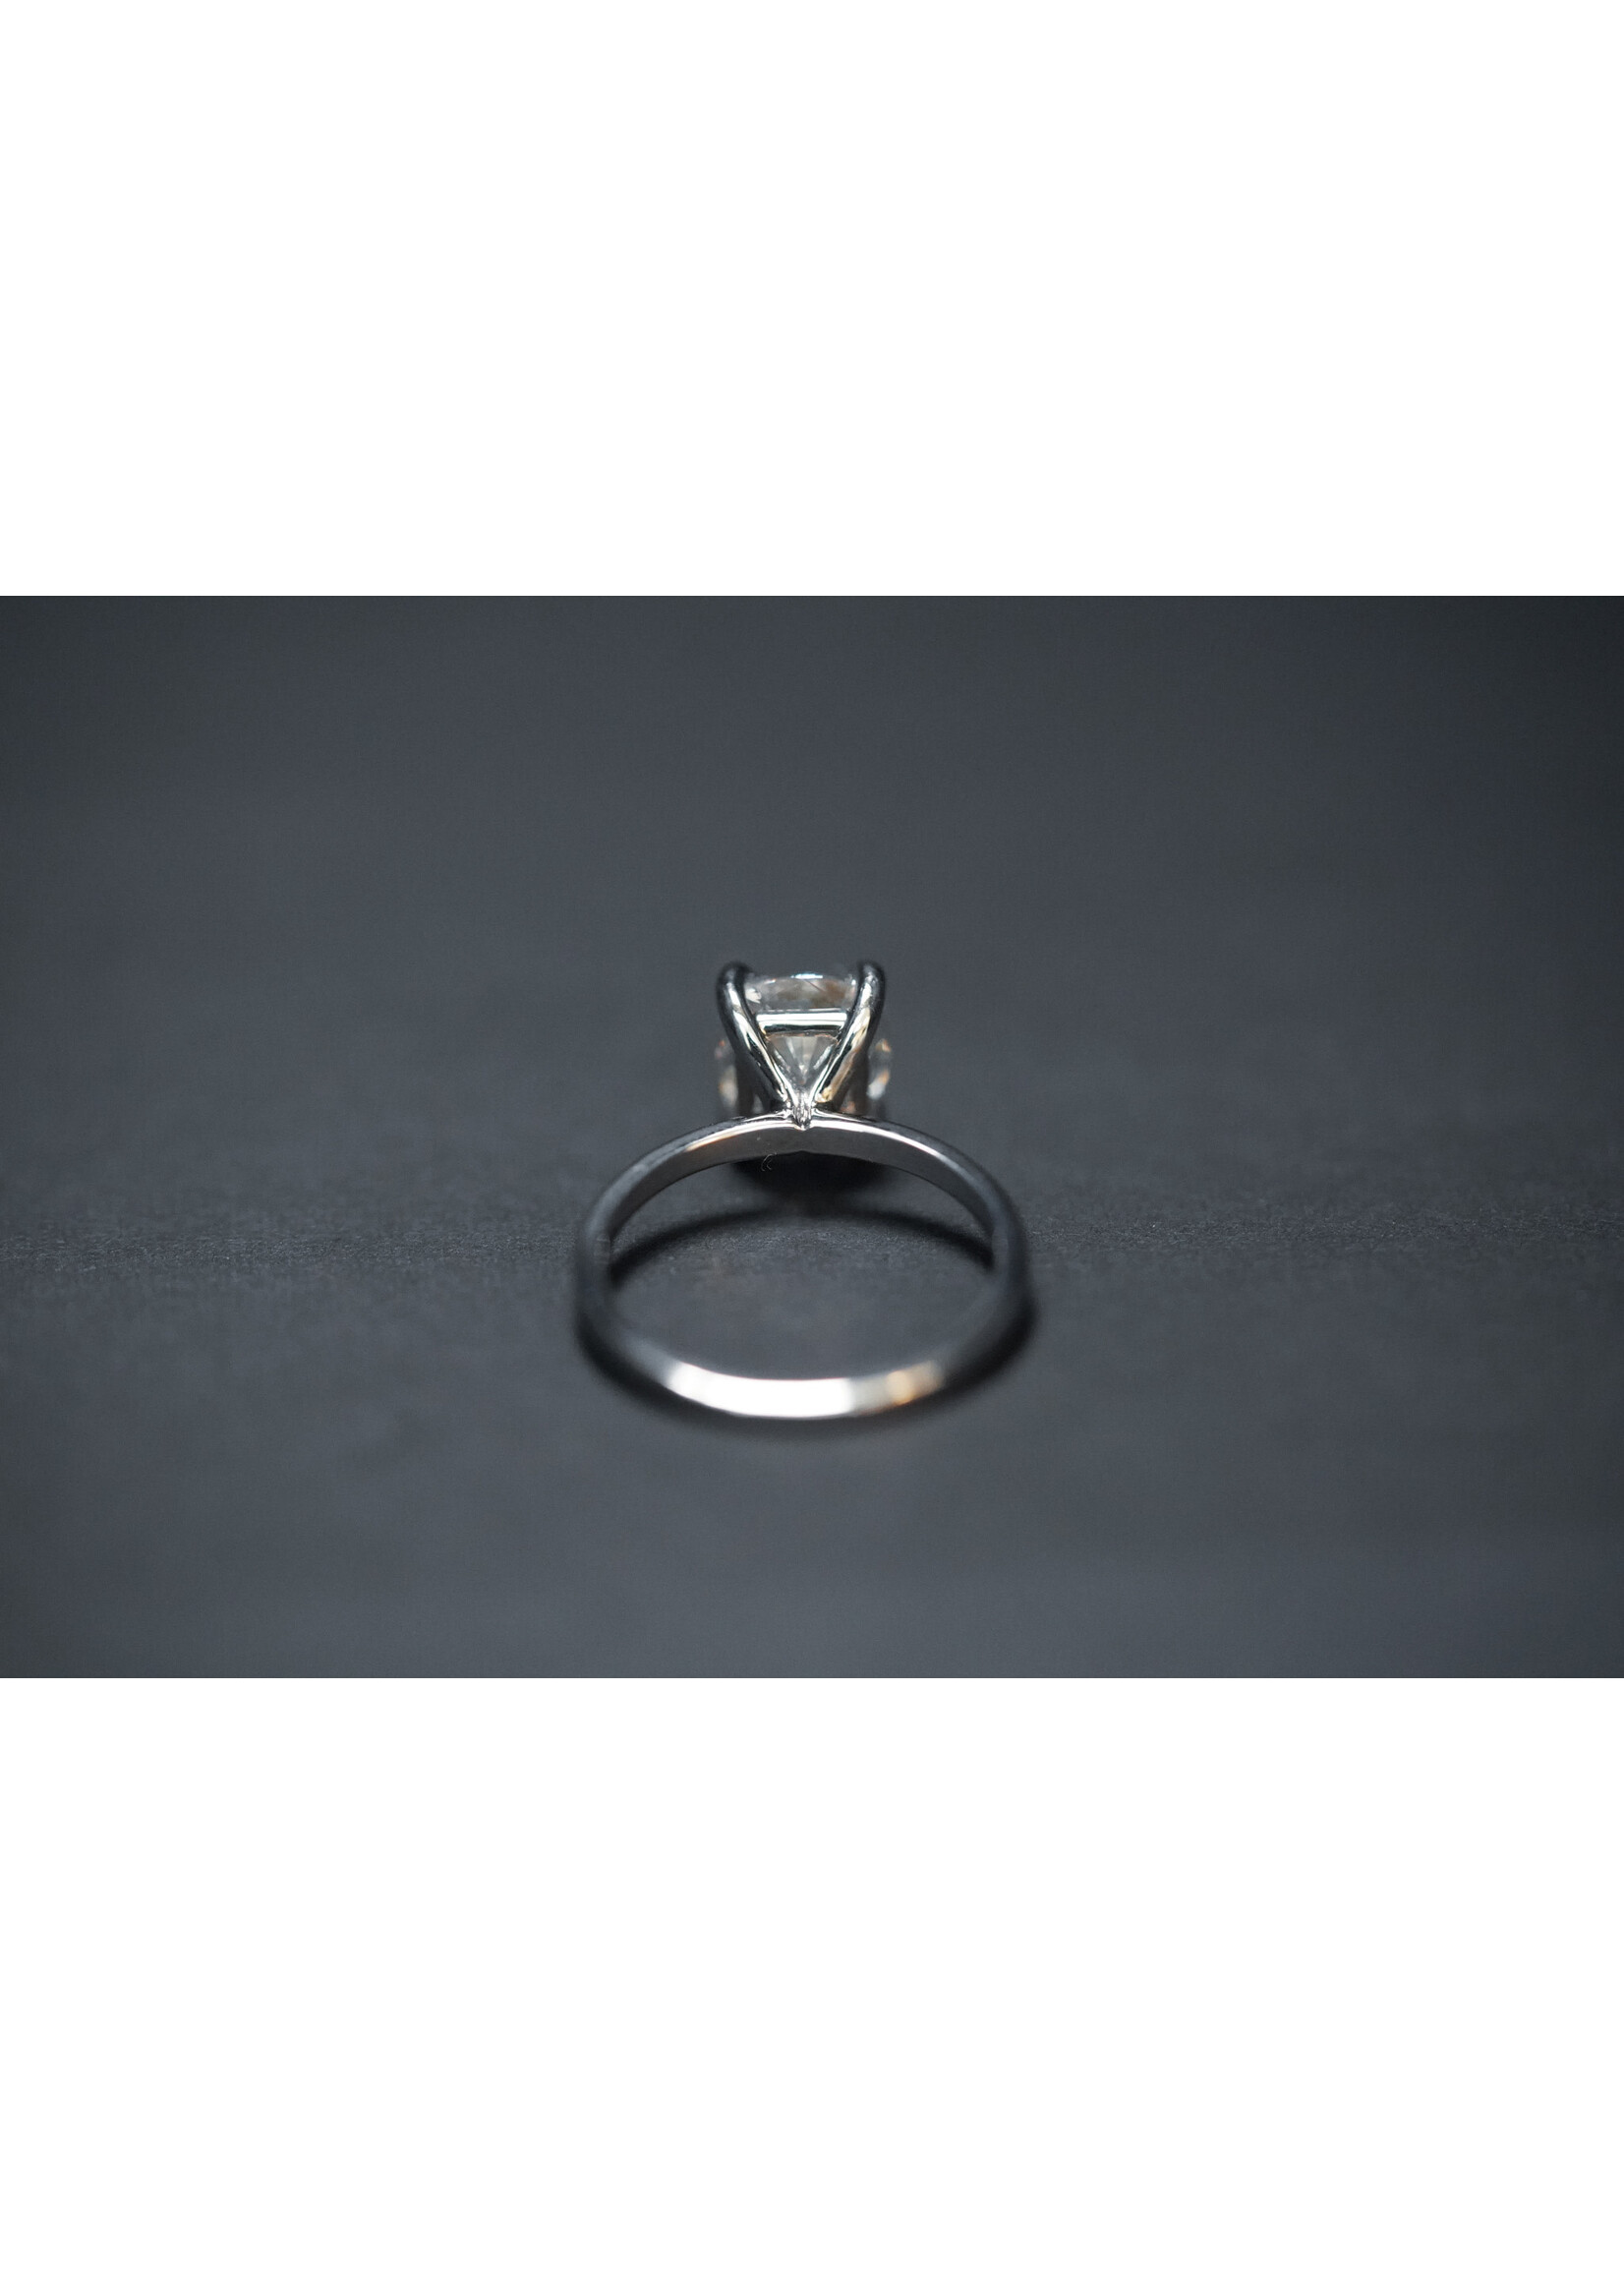 14KW 3.38g 3.02ct E/SI1 GIA Cushion Diamond Solitaire Engagement Ring (size 7)